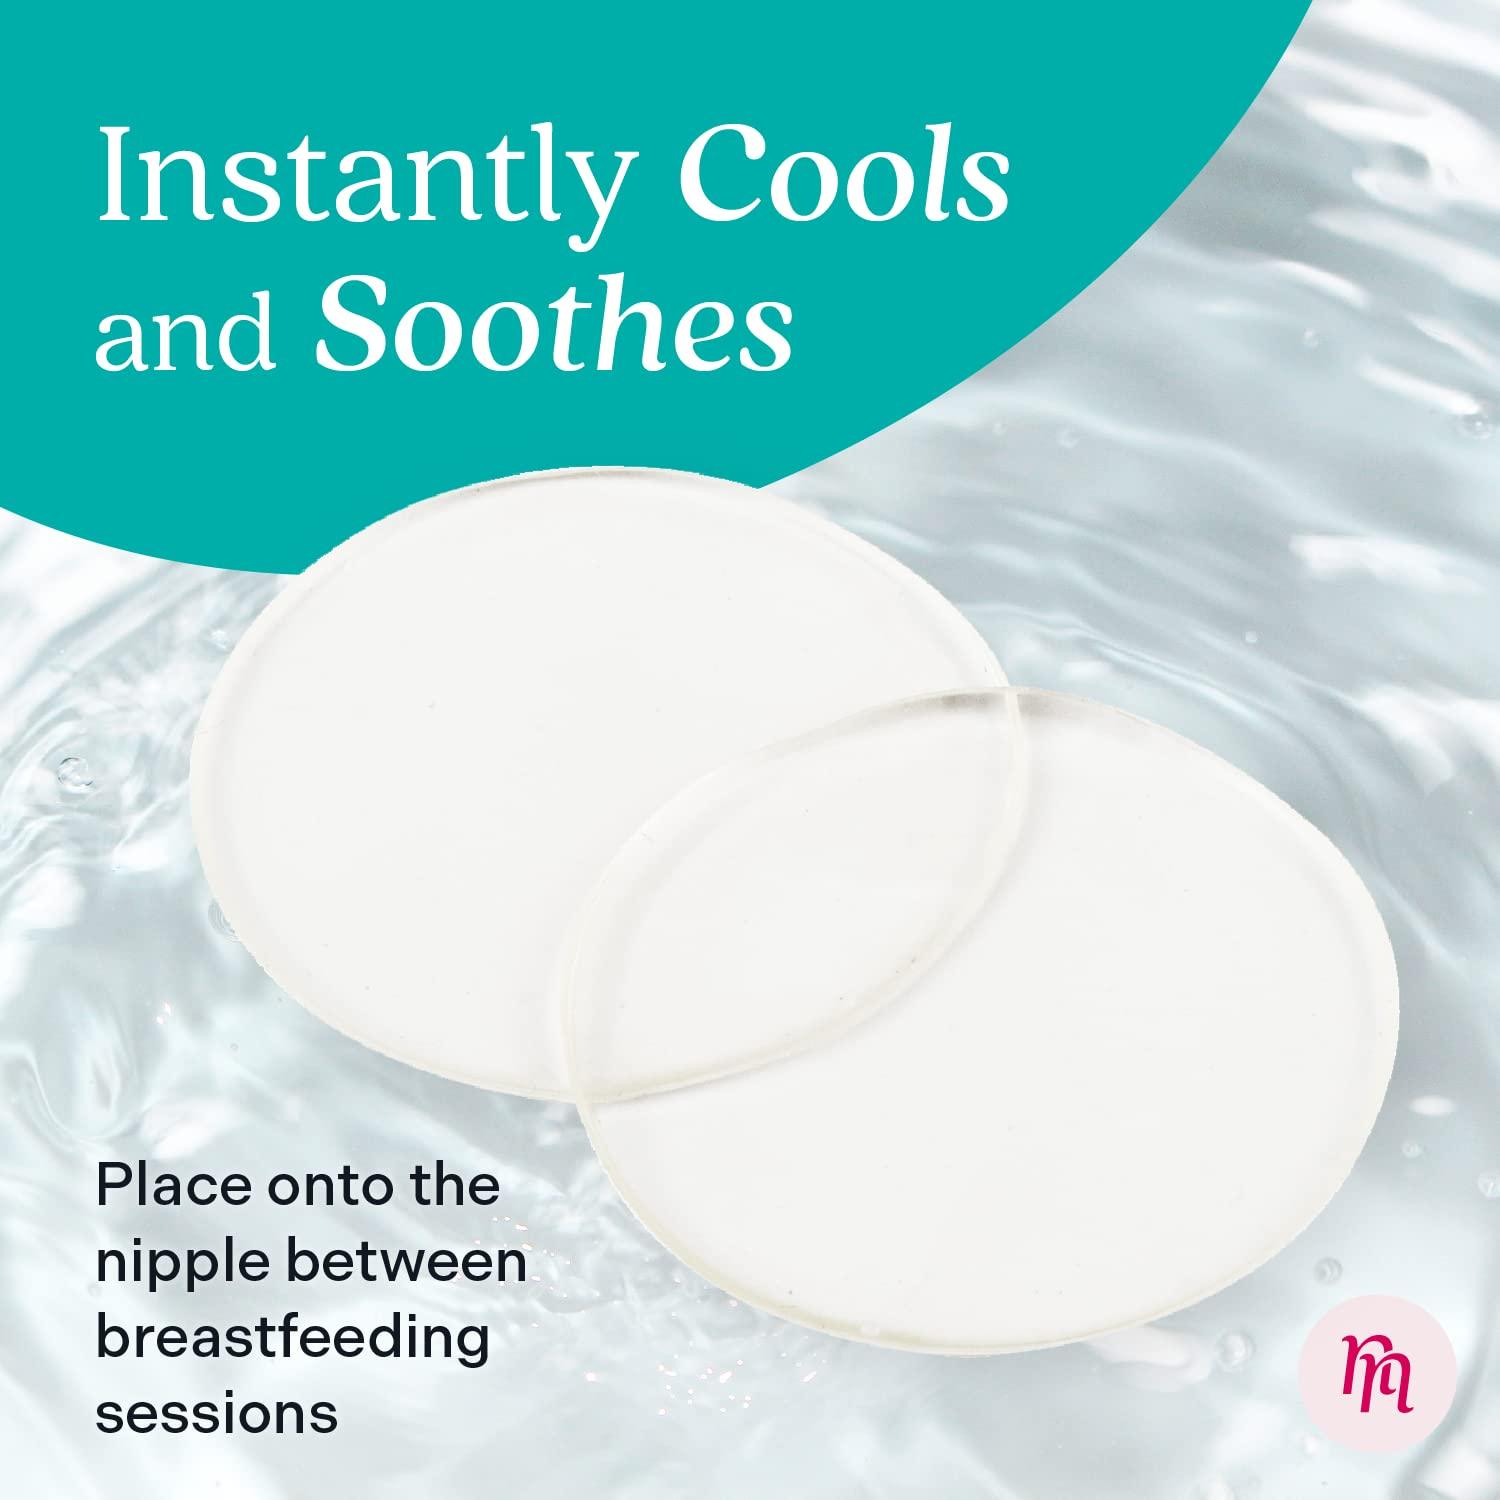 Thermal Silicone Gel Pad, Soothing Nursing Pillows with Flaxseed, Heating  Pad or Cold Compress for Breastfeeding